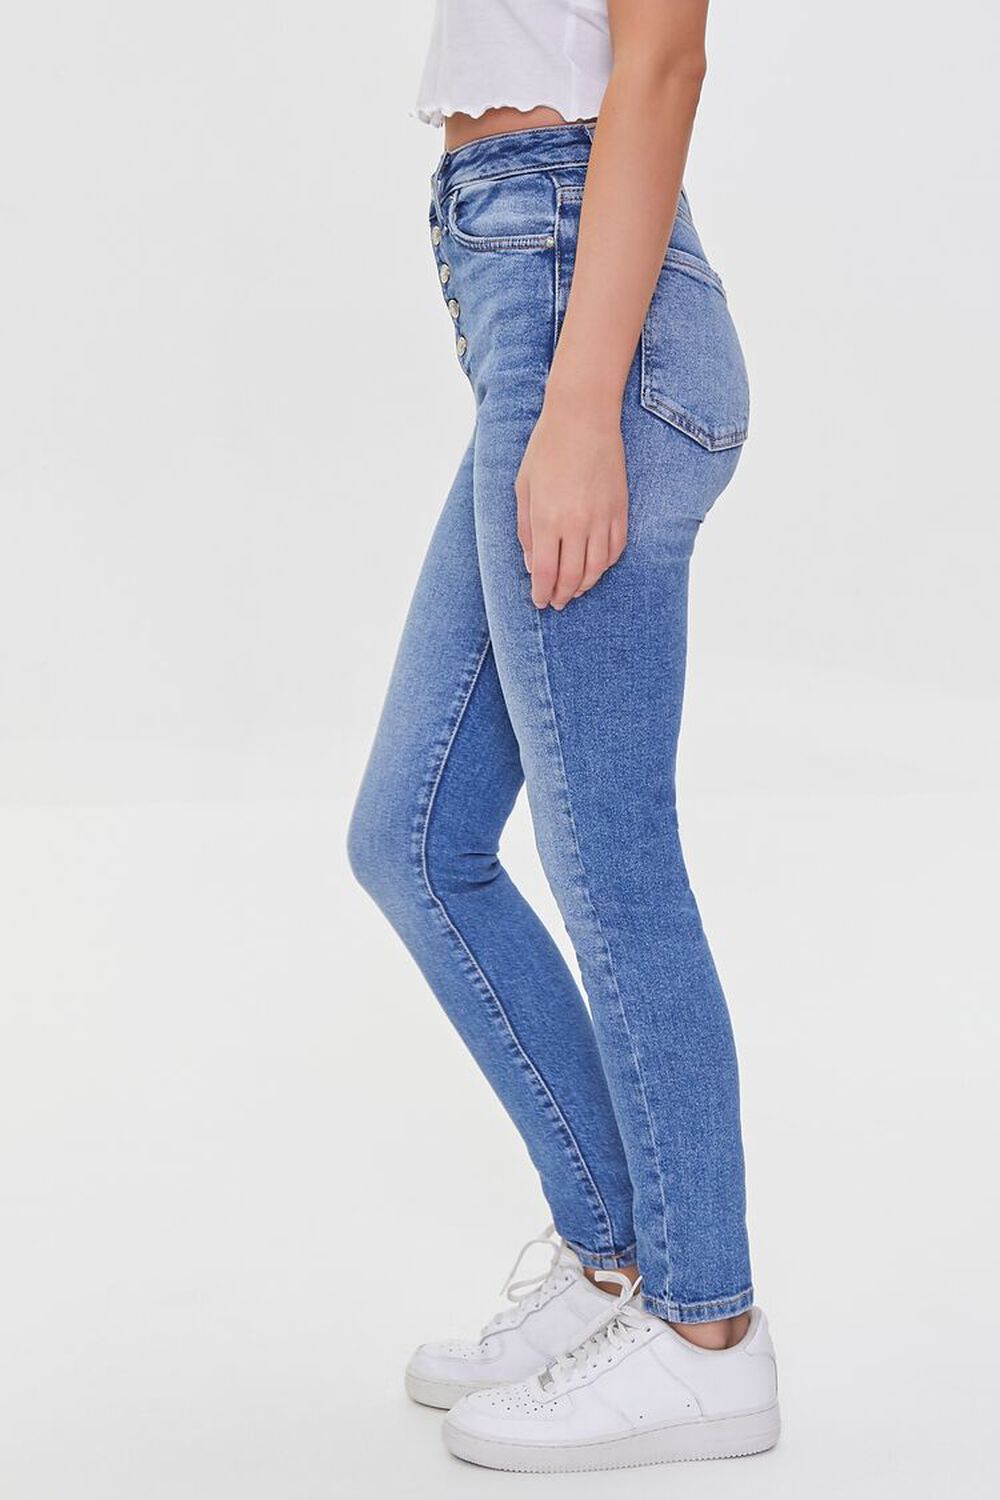 Recycled Cotton High-Rise Skinny Jeans